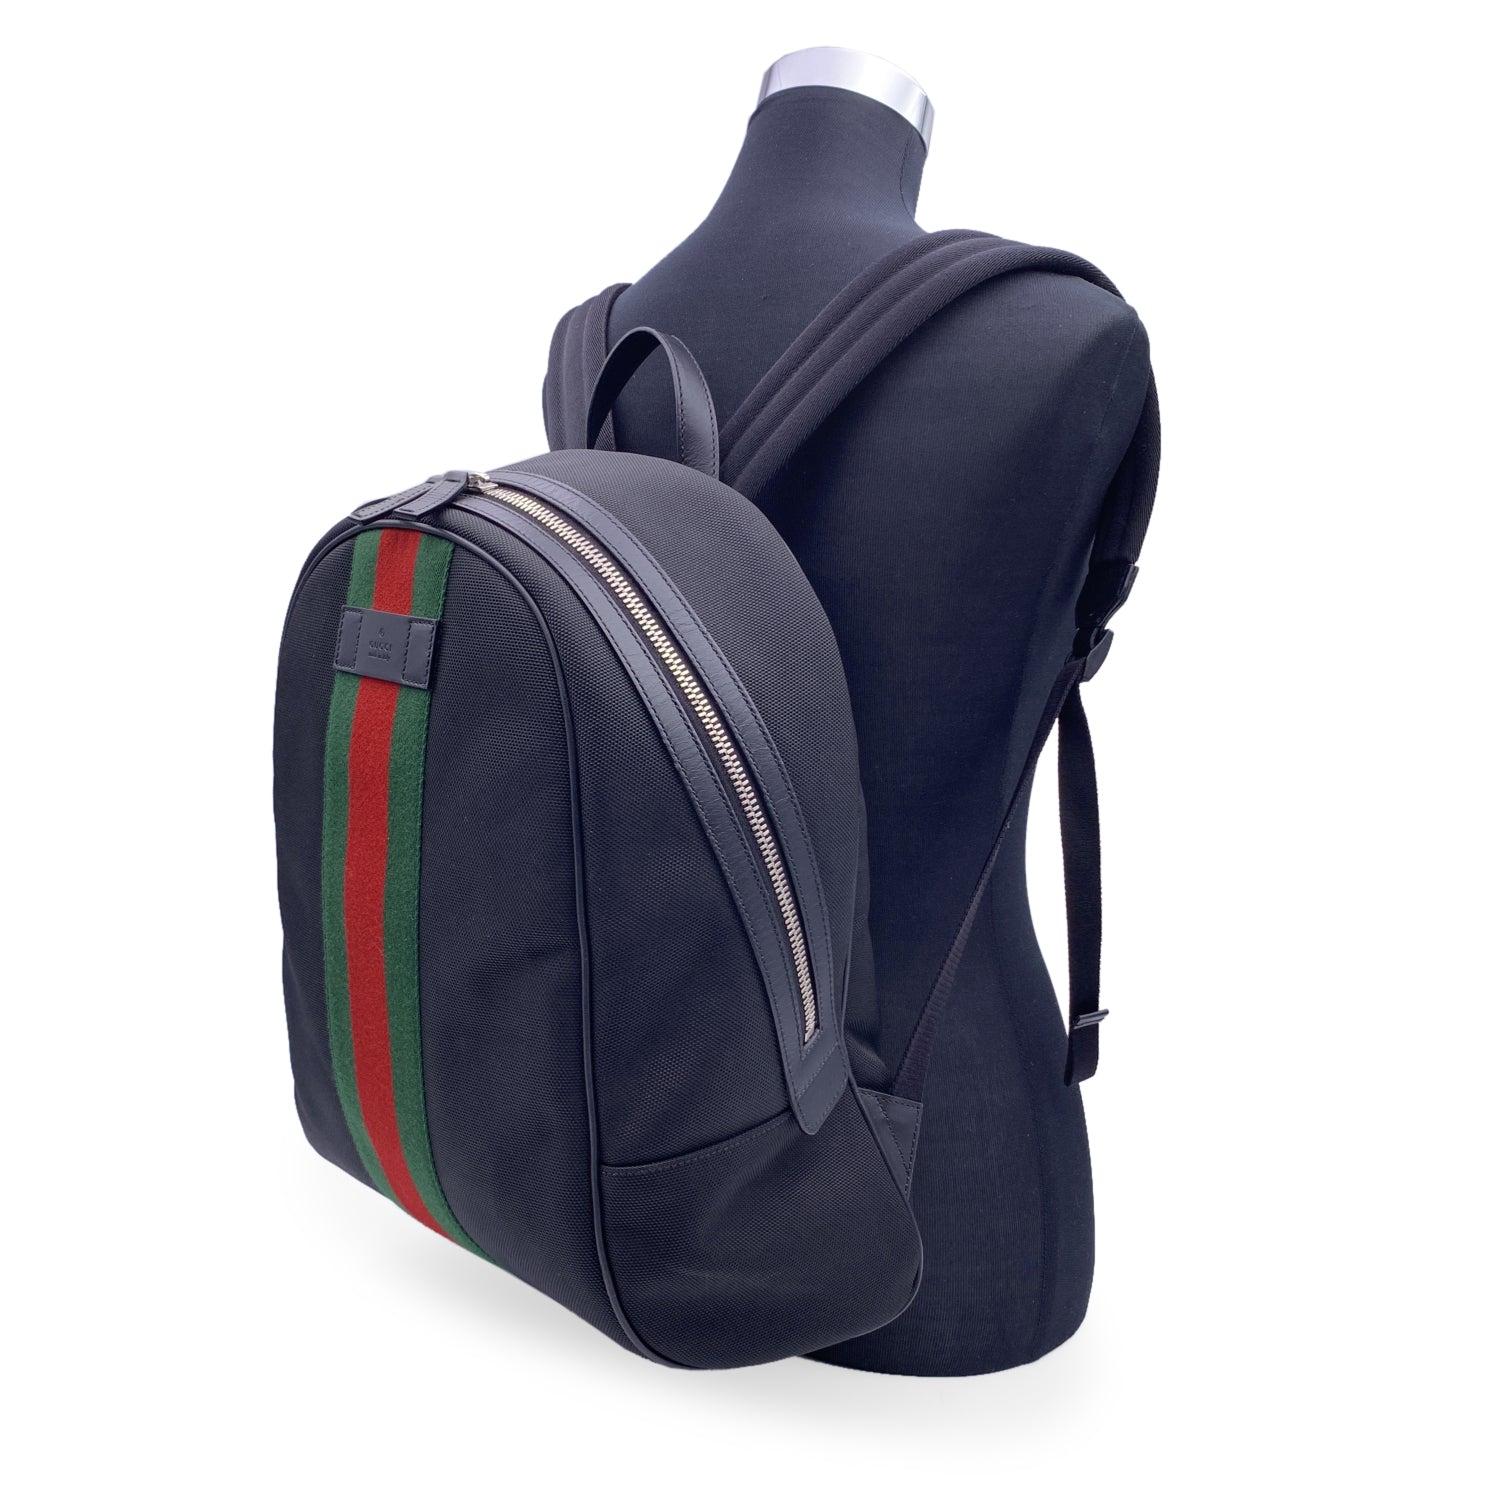 Unisex Backpack by Gucci, crafted in durable black techno canvas. It featuresgreen/red/green stripes on th front. Upper zipper closure. 1 side zipper pocket inside. Adjustable backstraps. 'GUCCI - Made in Italy' tag (with serial number on its